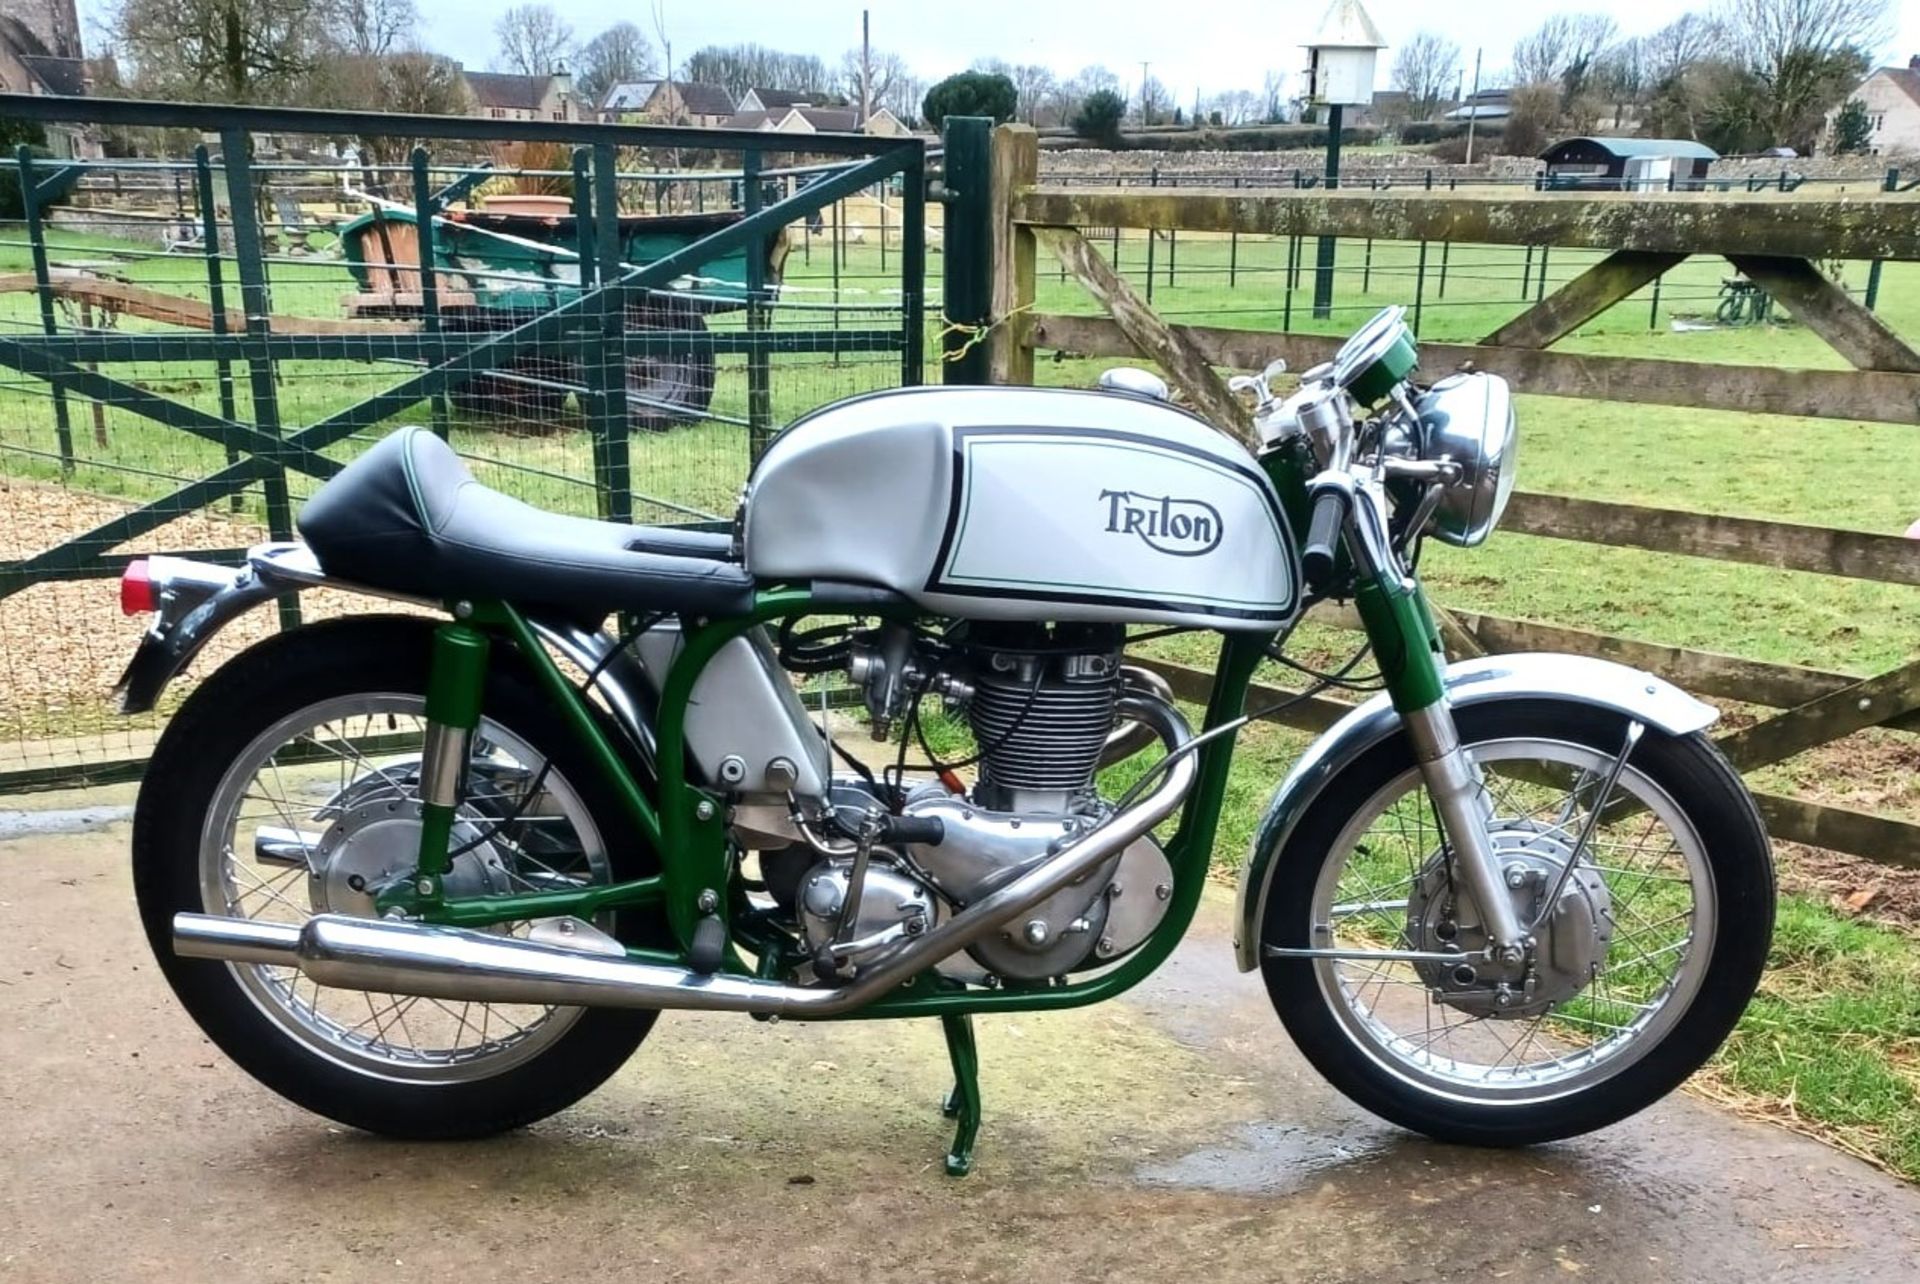 1958 TRITON 650cc Registration Number: 482 XVW Frame Number: TBA Recorded Mileage: 14 miles -